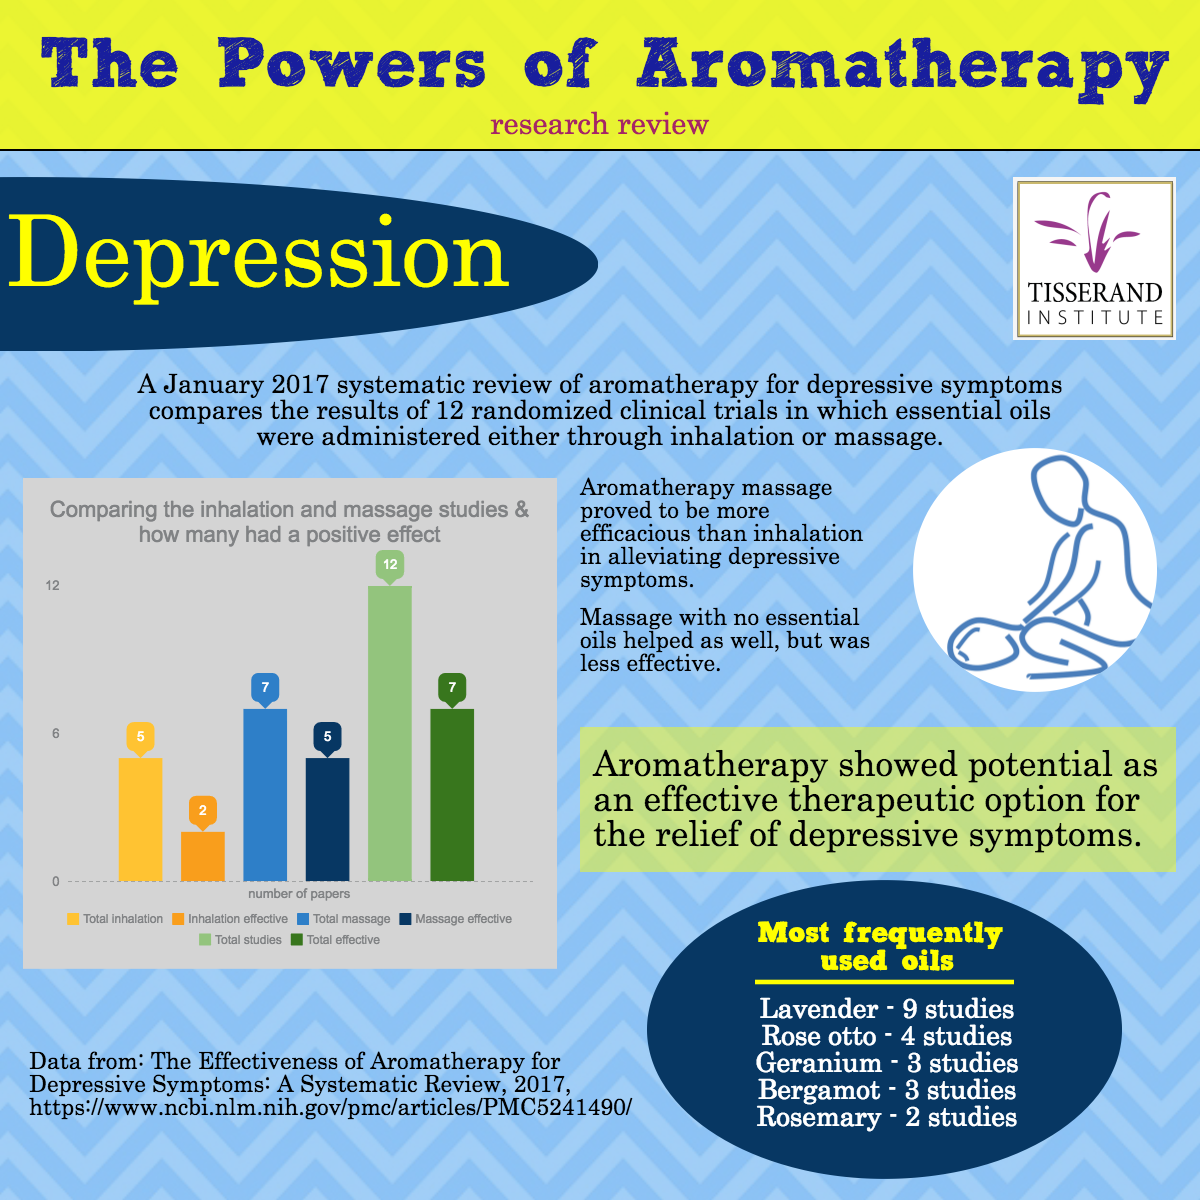 Depression and the Powers of Aromatherapy